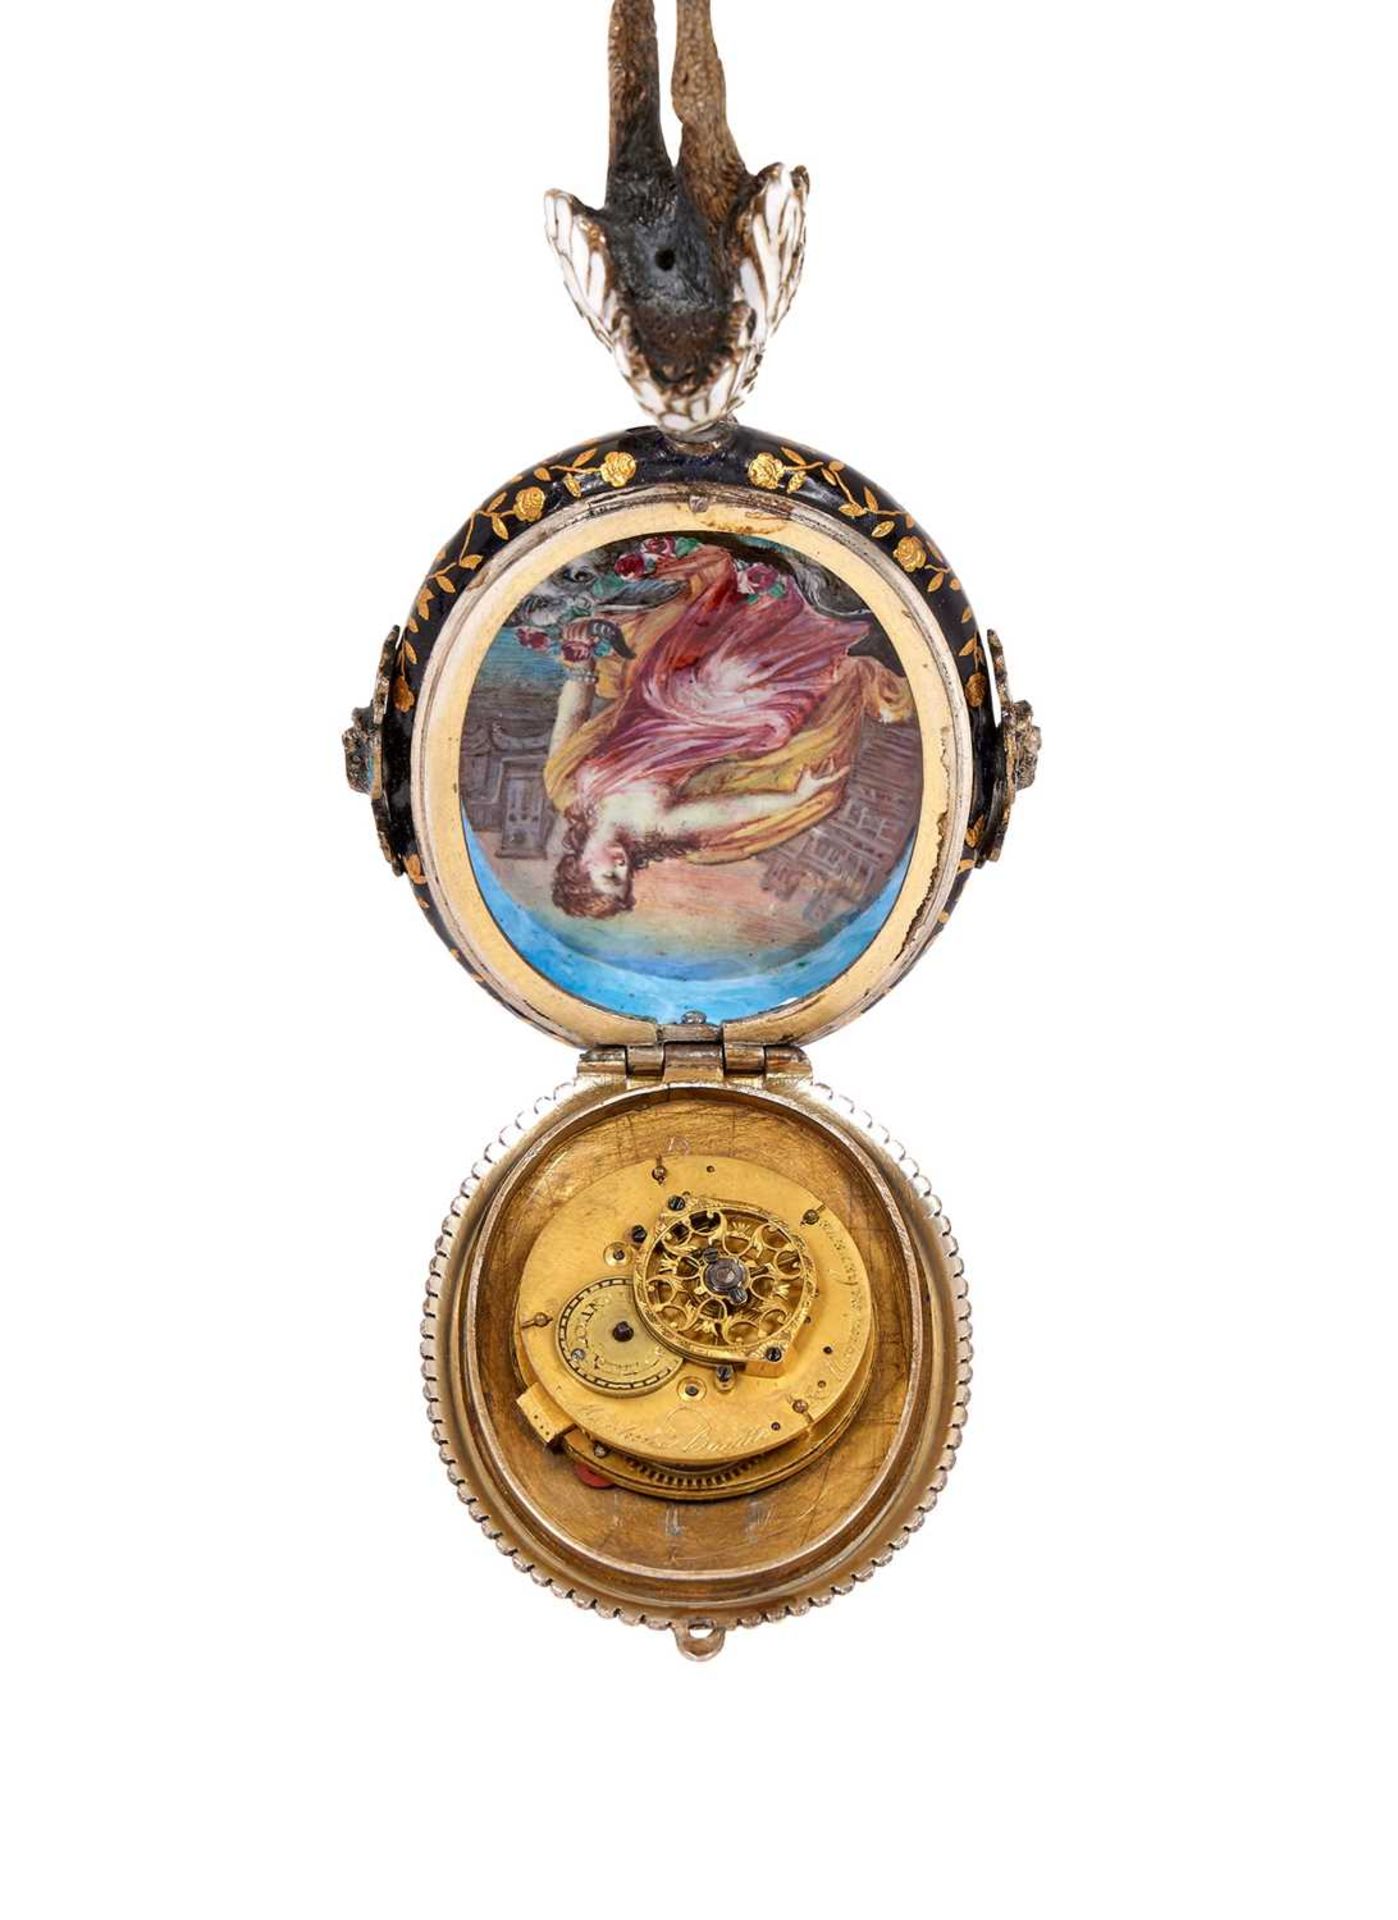 A FINE 19TH CENTURY VIENNESE ENAMEL AND SILVER TABLE CLOCK IN THE MANNER OF HERMANN RATZERSDORFER - Bild 3 aus 3